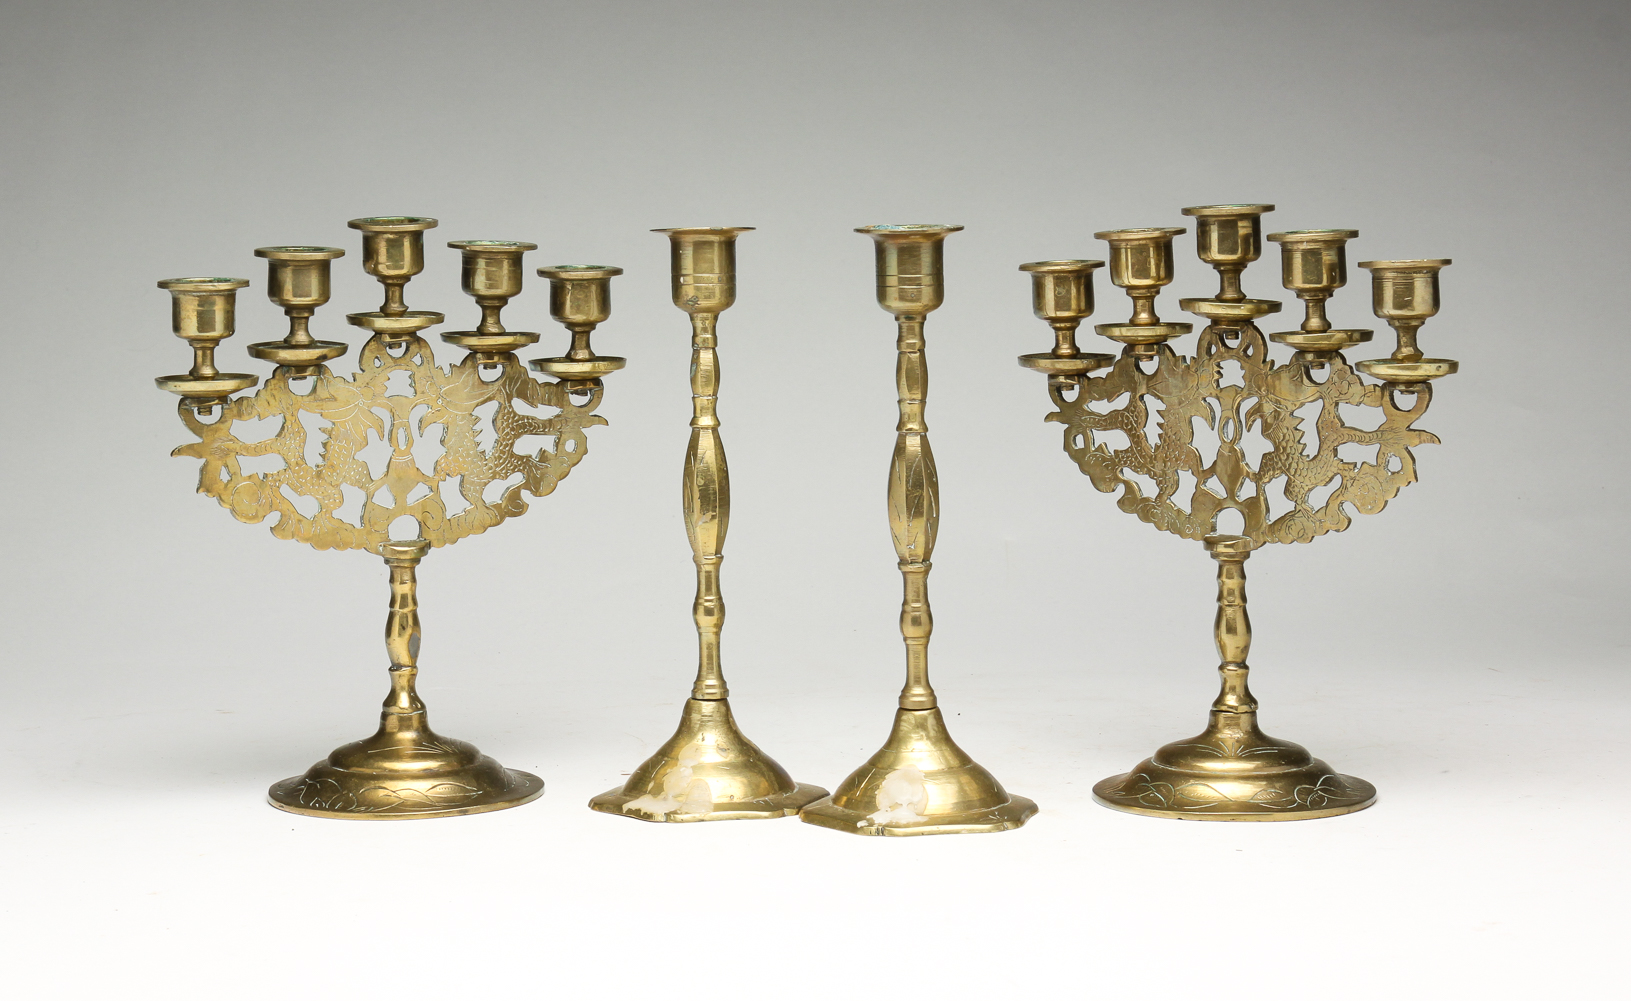 TWO PAIR CHINESE BRASS CANDLESTICKS  2e027d